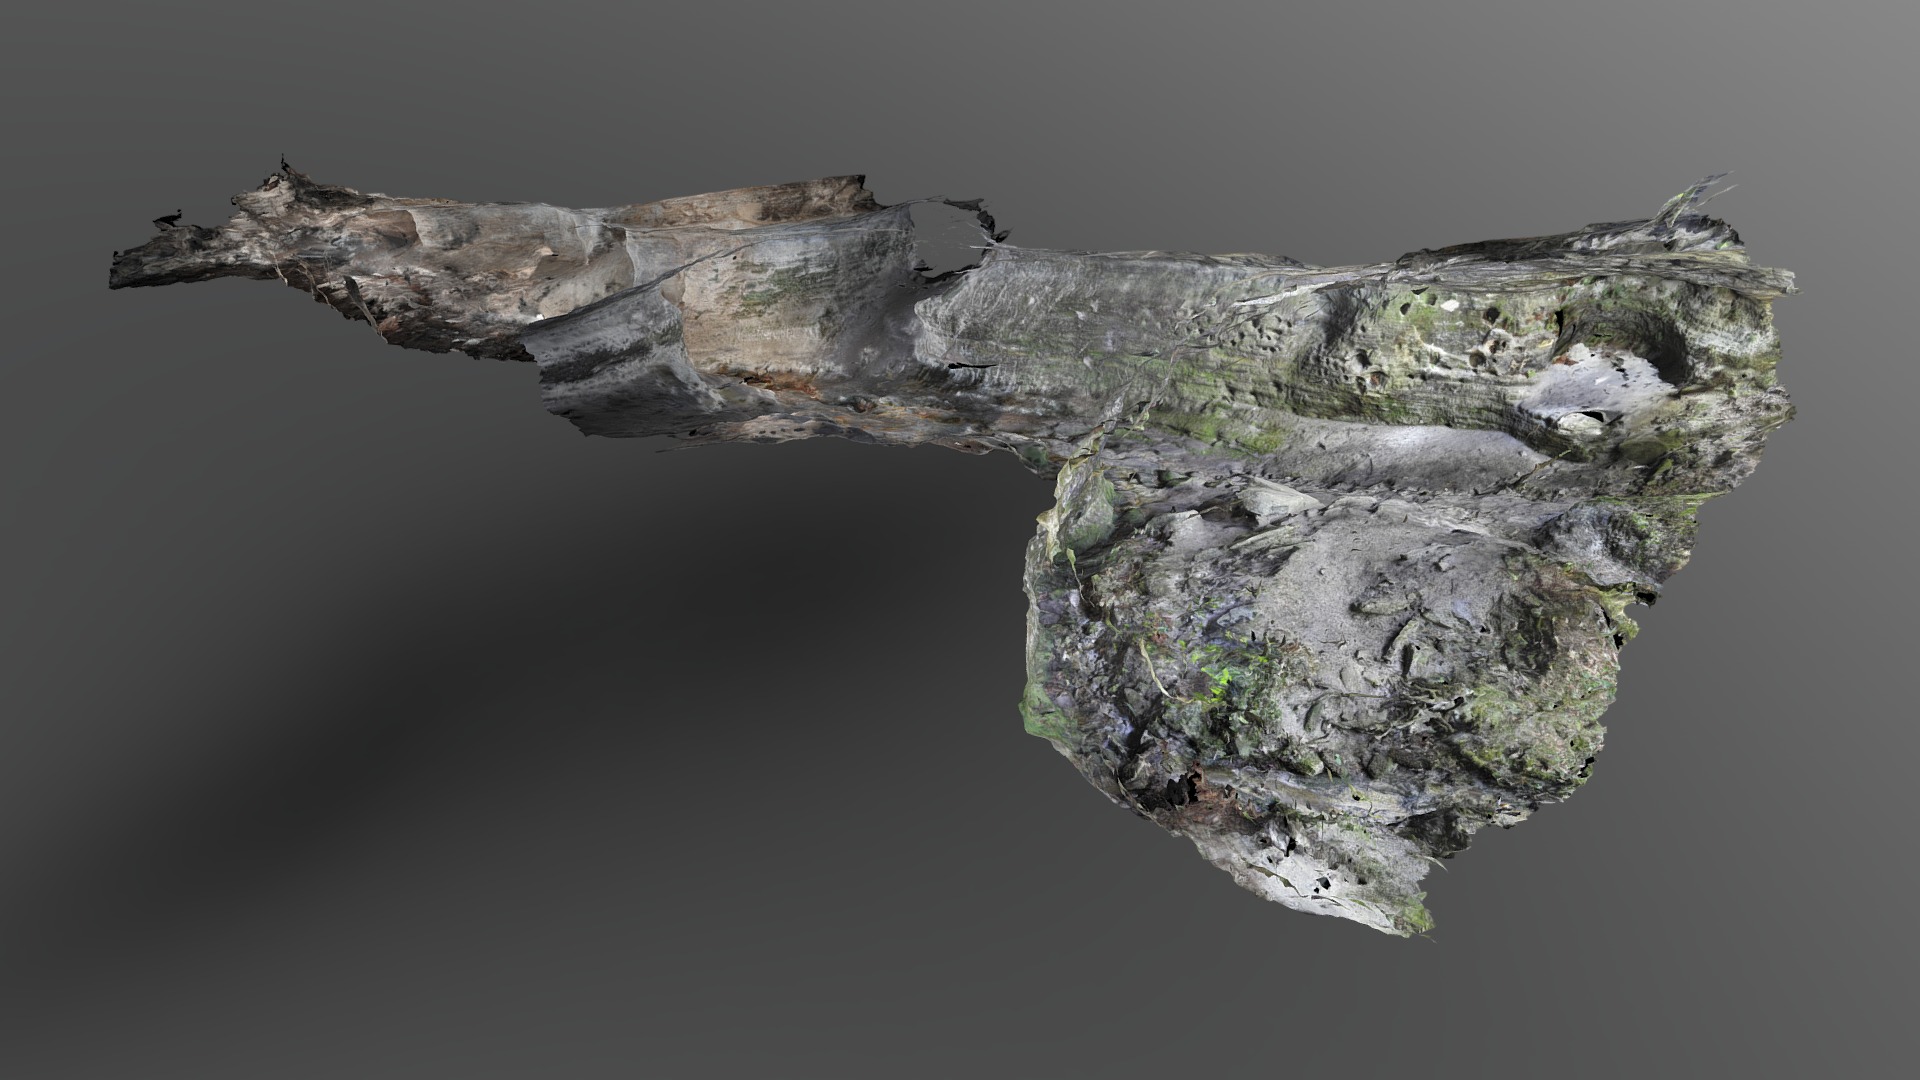 3D model Gruta dos Moreiras - This is a 3D model of the Gruta dos Moreiras. The 3D model is about a large rock in the water.